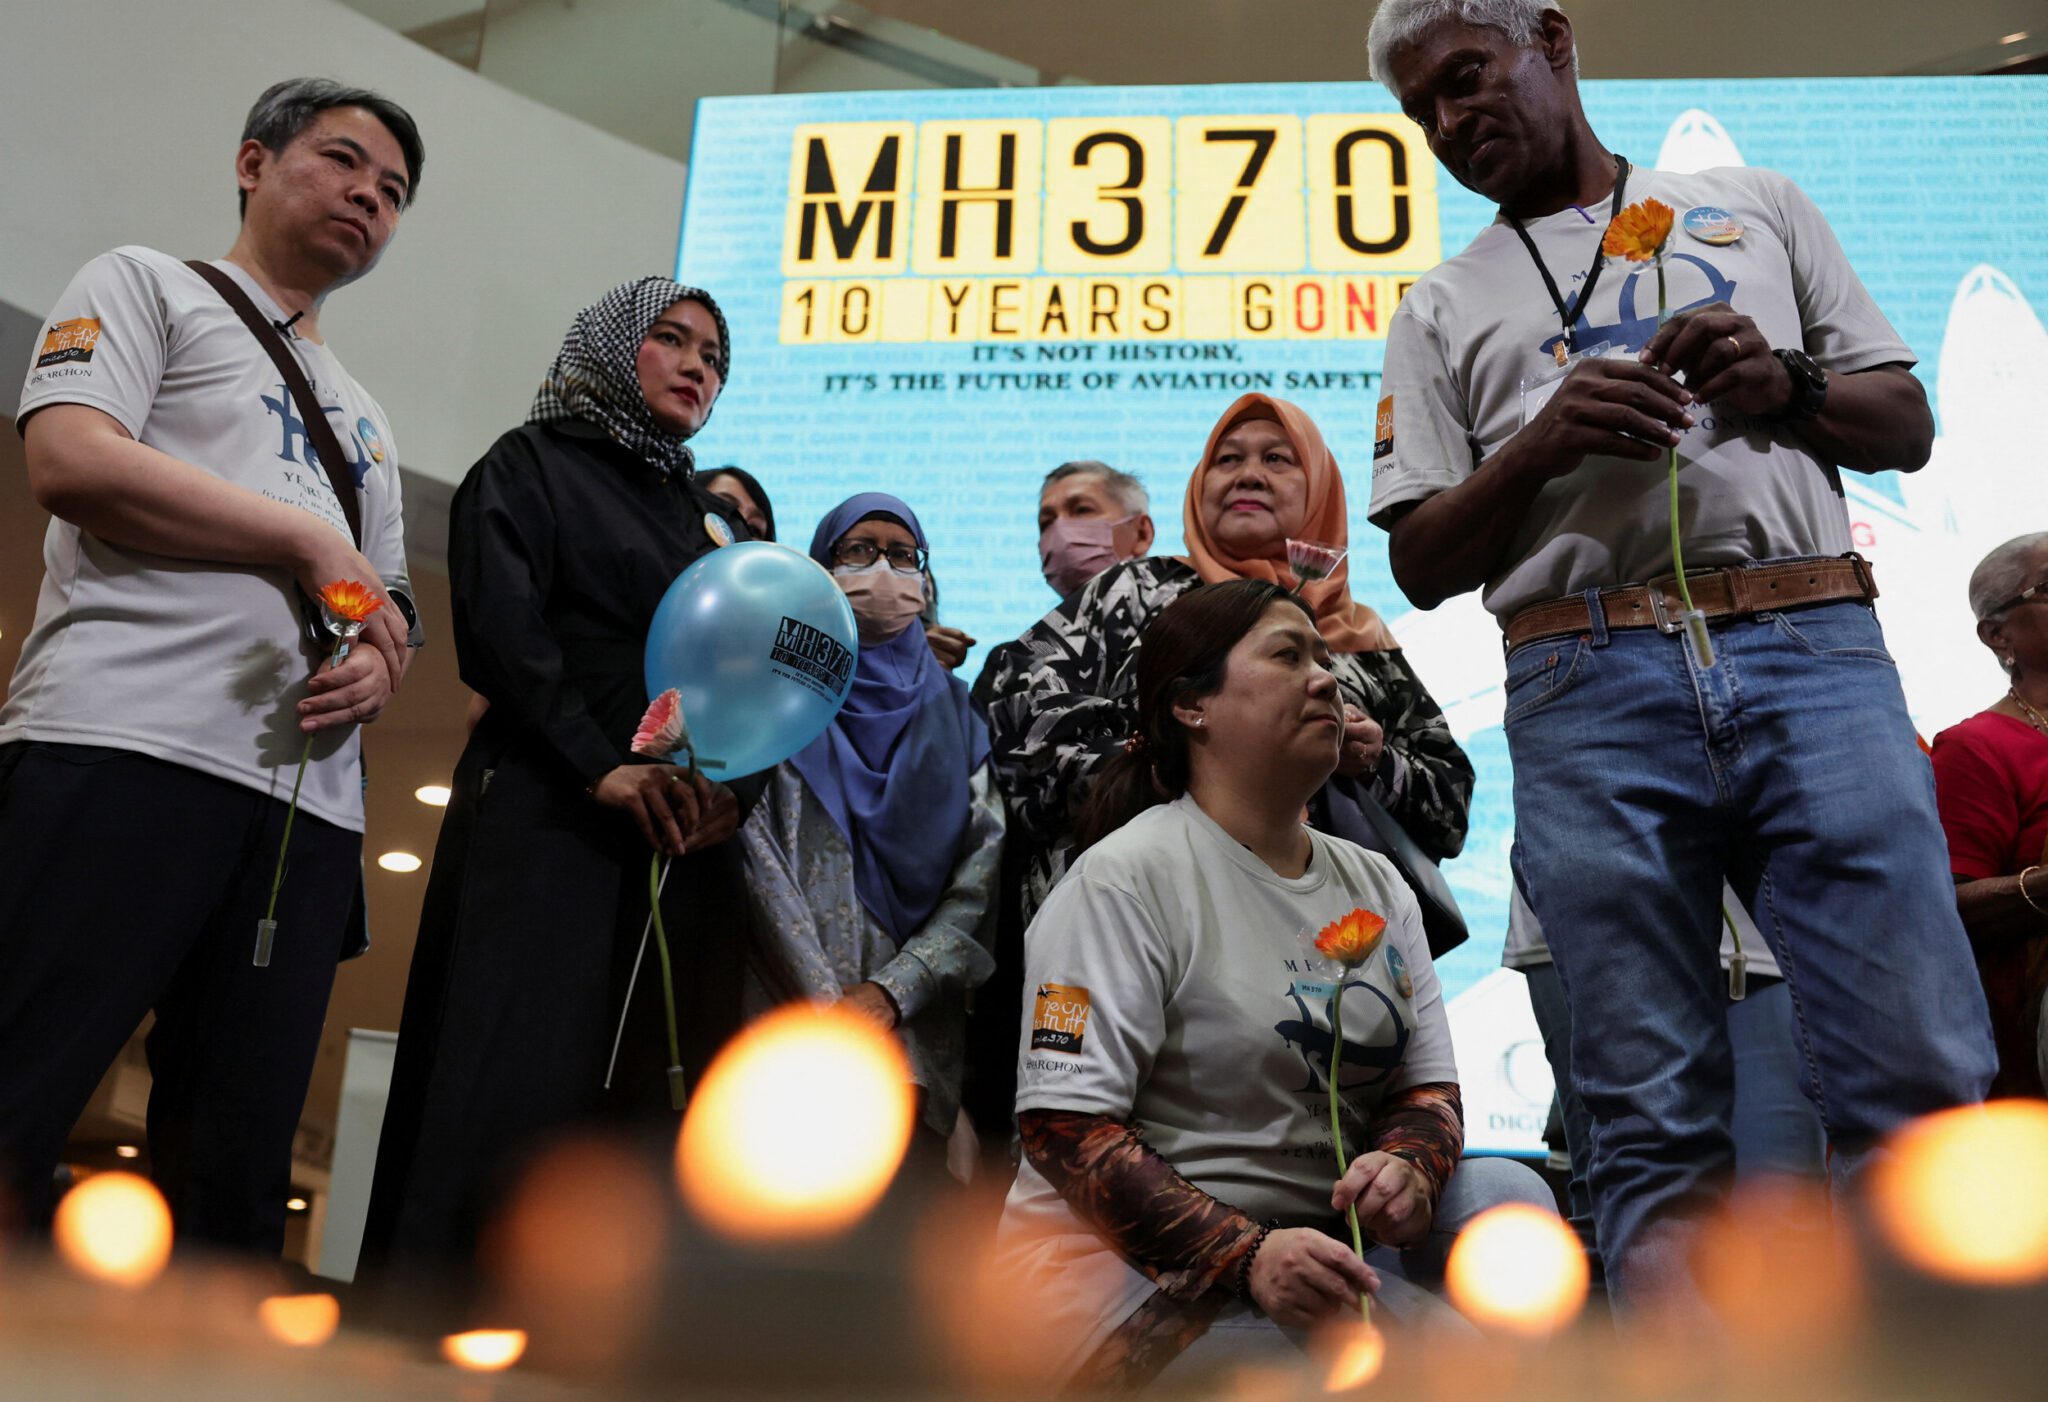 Families of those aboard Malaysia Airlines Flight MH370 during their annual remembrance event